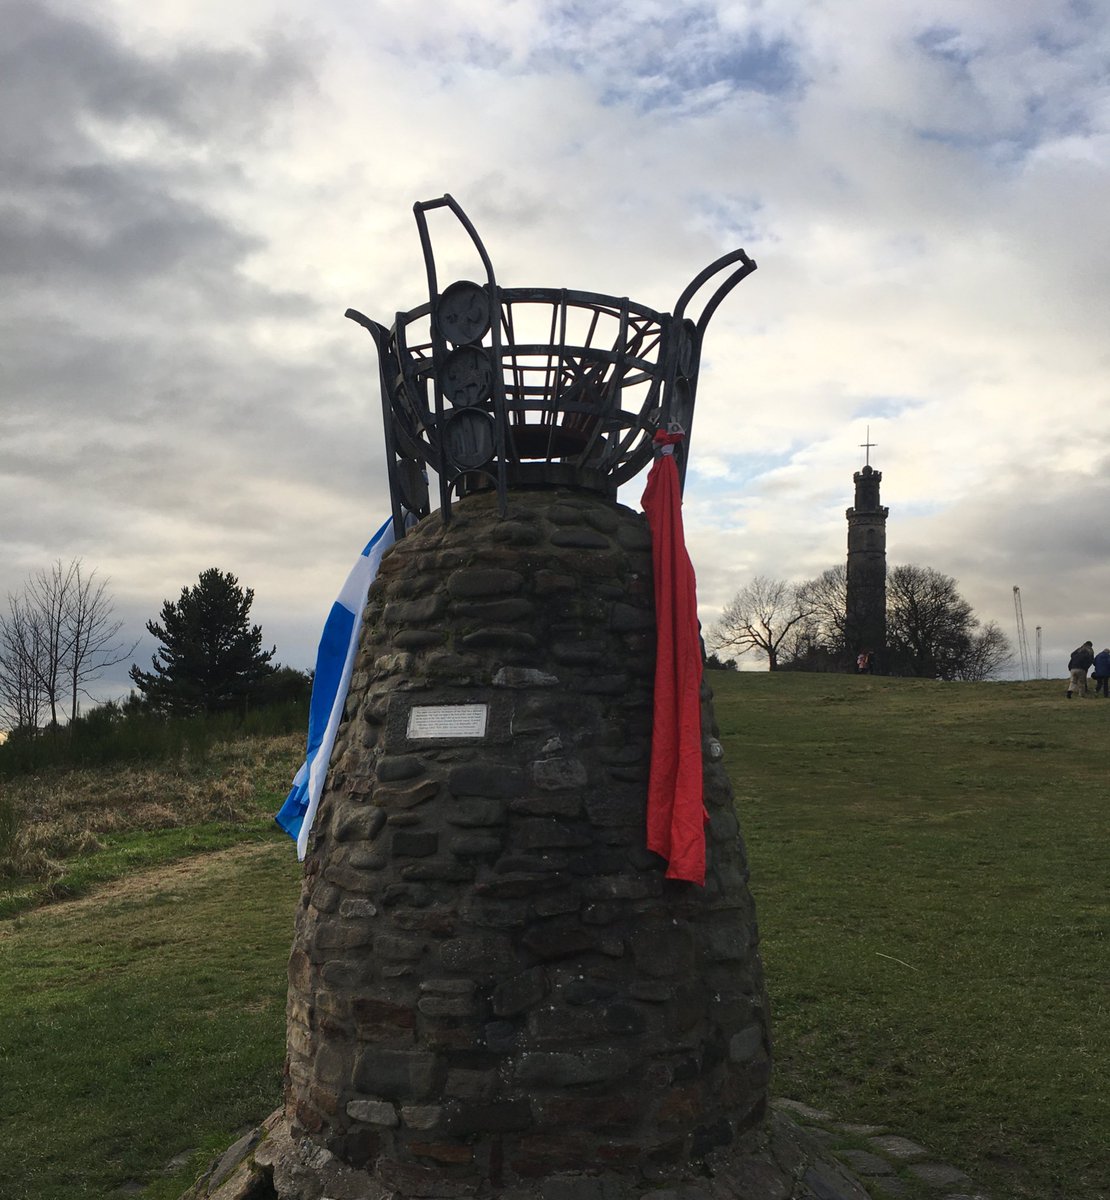 My dominant memory of 12 December 2019 happened the next day. I met  @shirkerism and others in Edinburgh to commiserate. We gathered at the Democracy Cairn on Calton Hill, which was a bit pretentious but cathartic as Scotland faced a Tory government and Brexit it didn’t vote for.